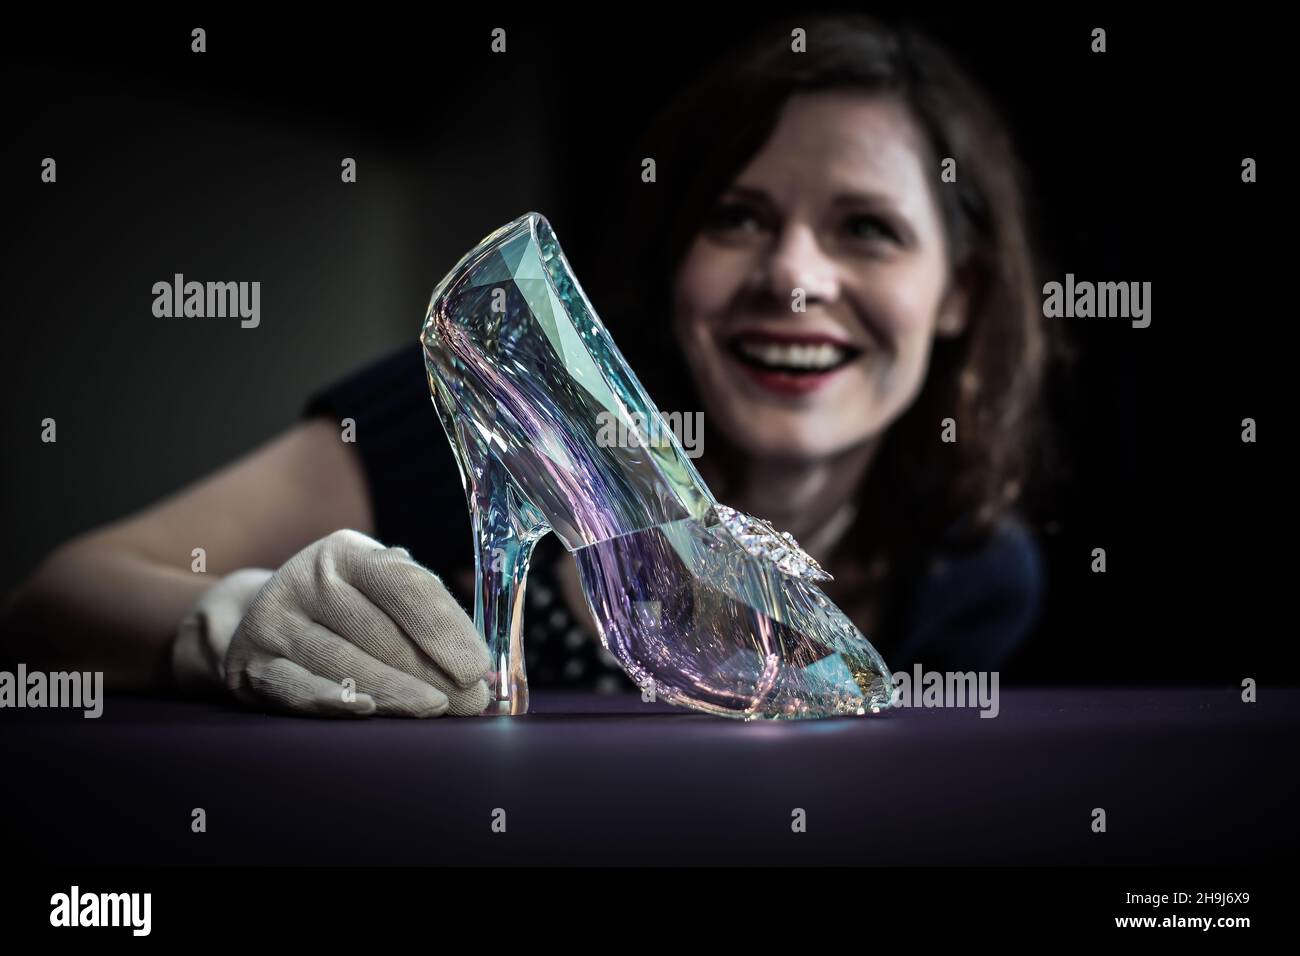 helen persson curator of the shoes pleasure and pain exhibition at the victoria and albert museum in london poses with a crystal swarovski slipper made for disneys cinderella film designed under the direction of academy award winning costume designer sandy powell the slipper has 221 facets in a light reflecting crystal blue aurora borealis coating 2H9J6X9